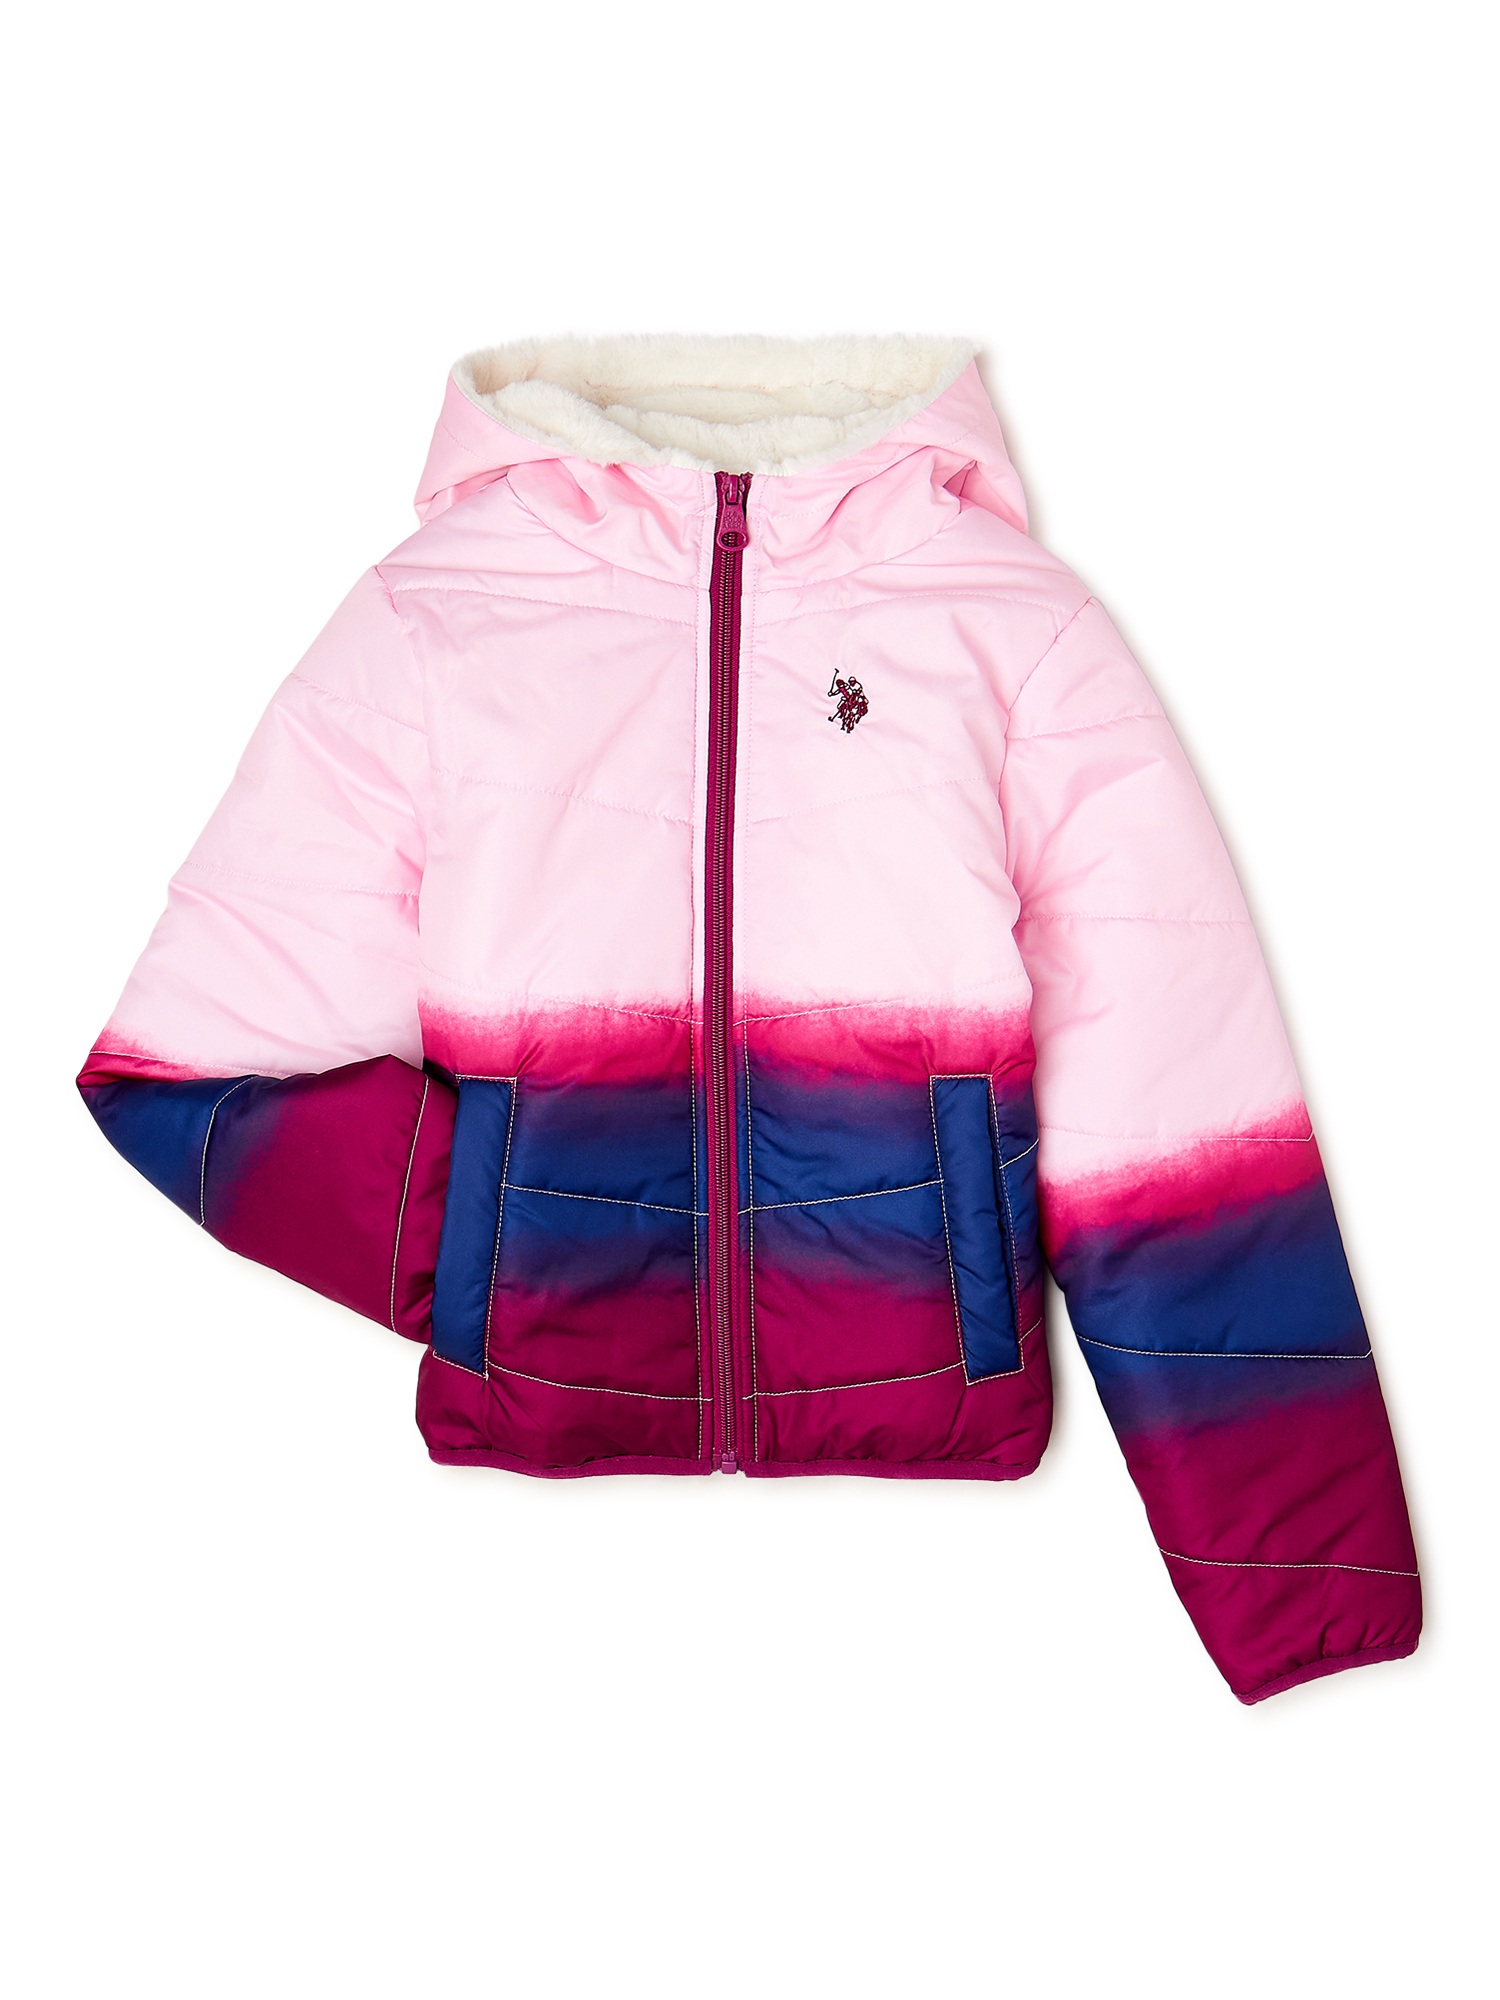 U.S. Polo Assn. Girls’ Dip-Dye Hooded Puffer Jacket with Faux Fur Lining, Sizes 4-16 - image 1 of 3